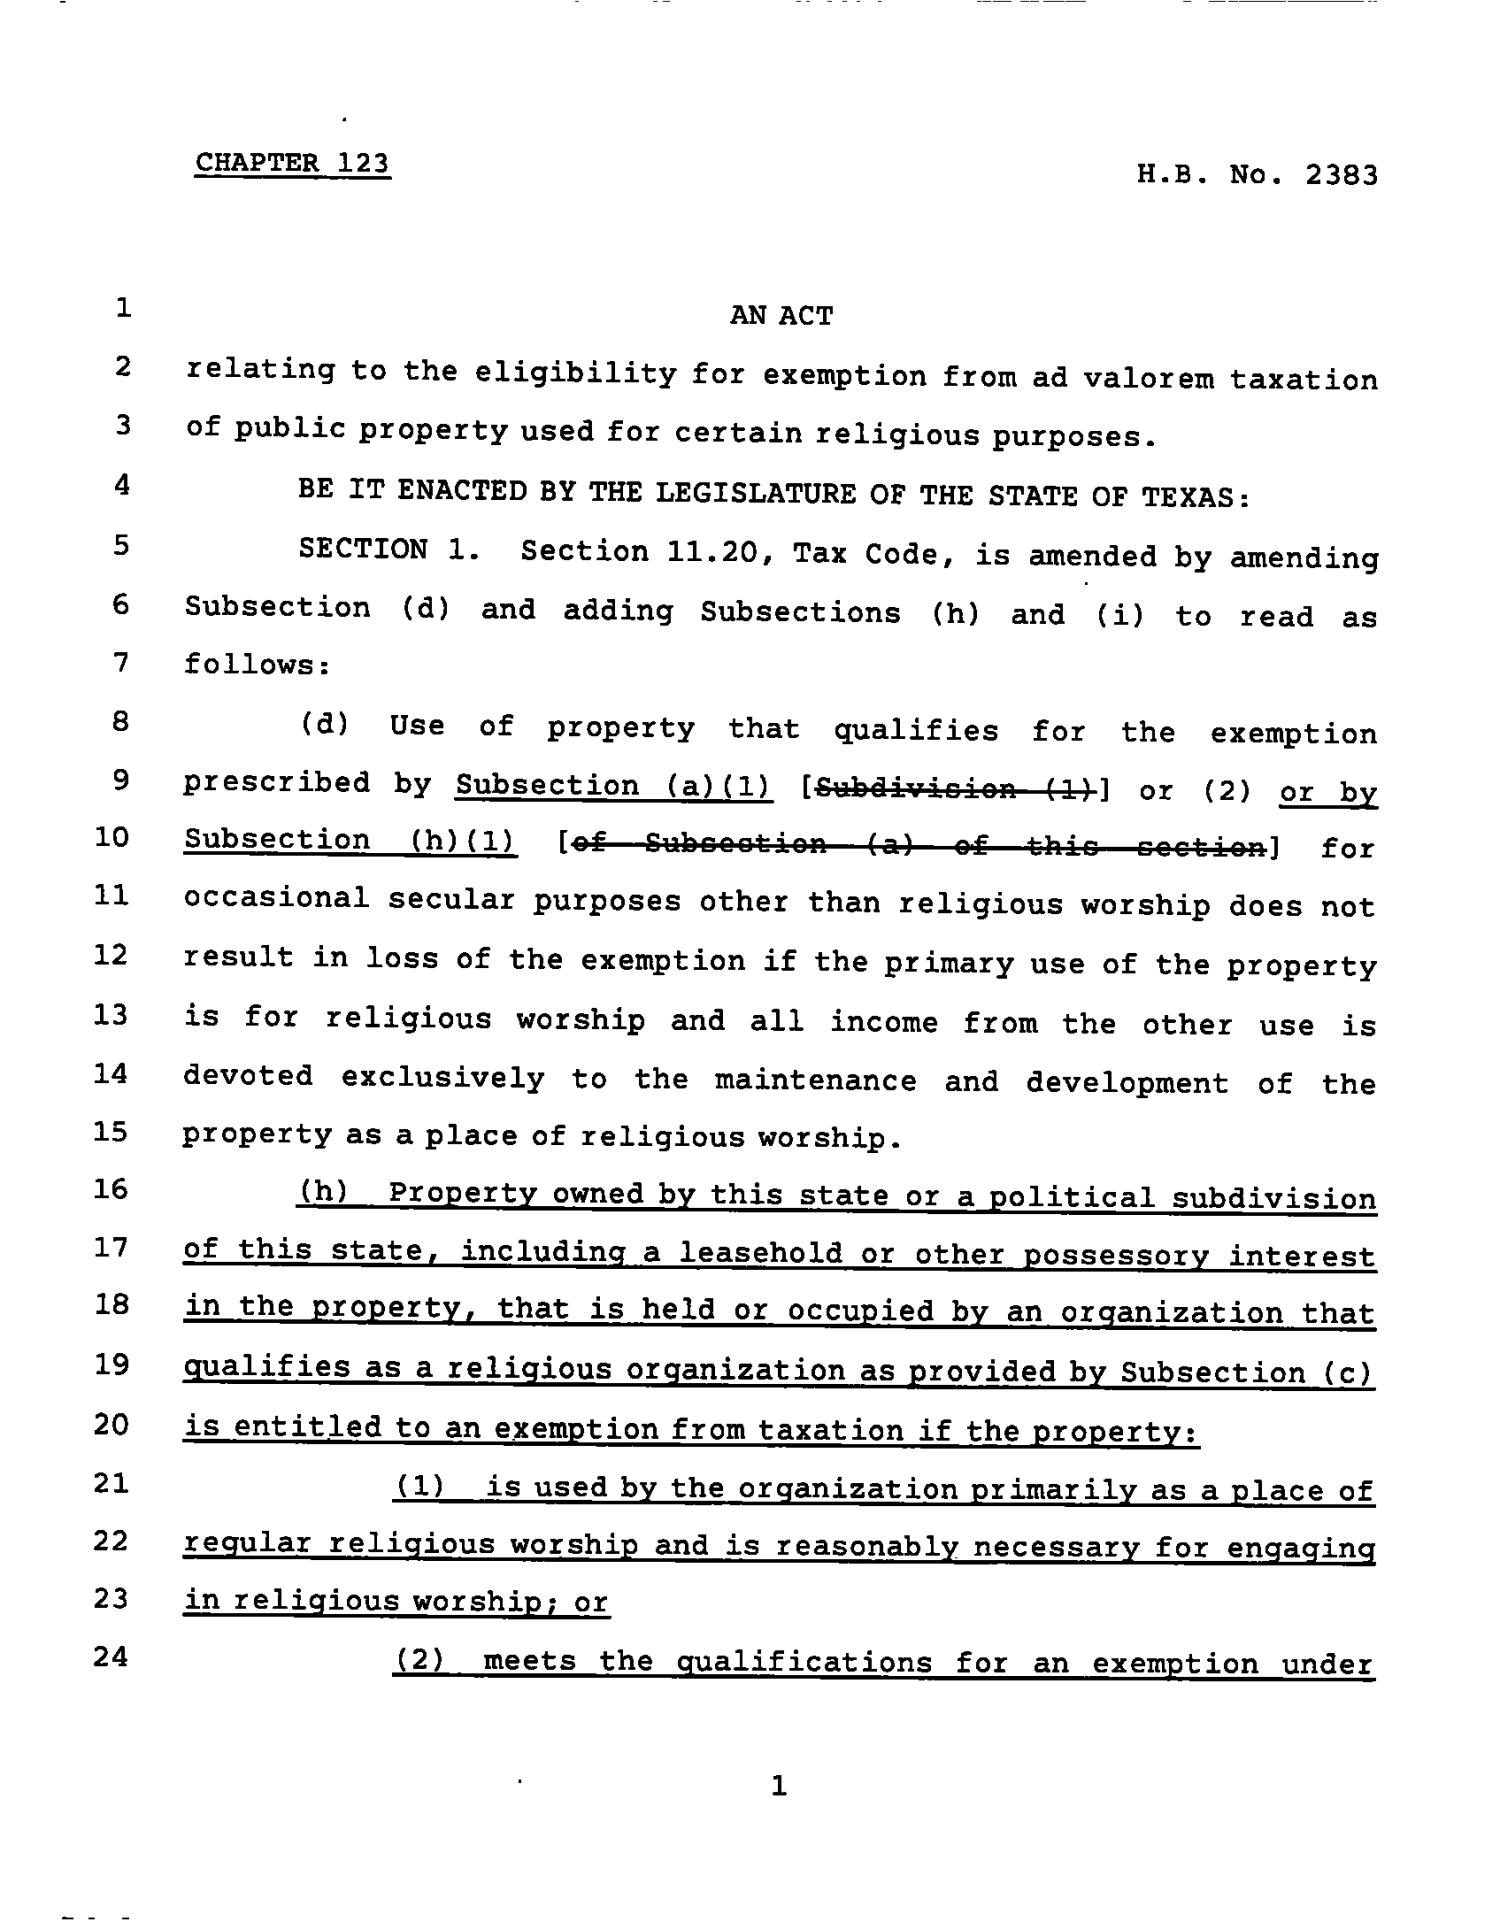 78th Texas Legislature, Regular Session, House Bill 2383, Chapter 123
                                                
                                                    [Sequence #]: 1 of 3
                                                